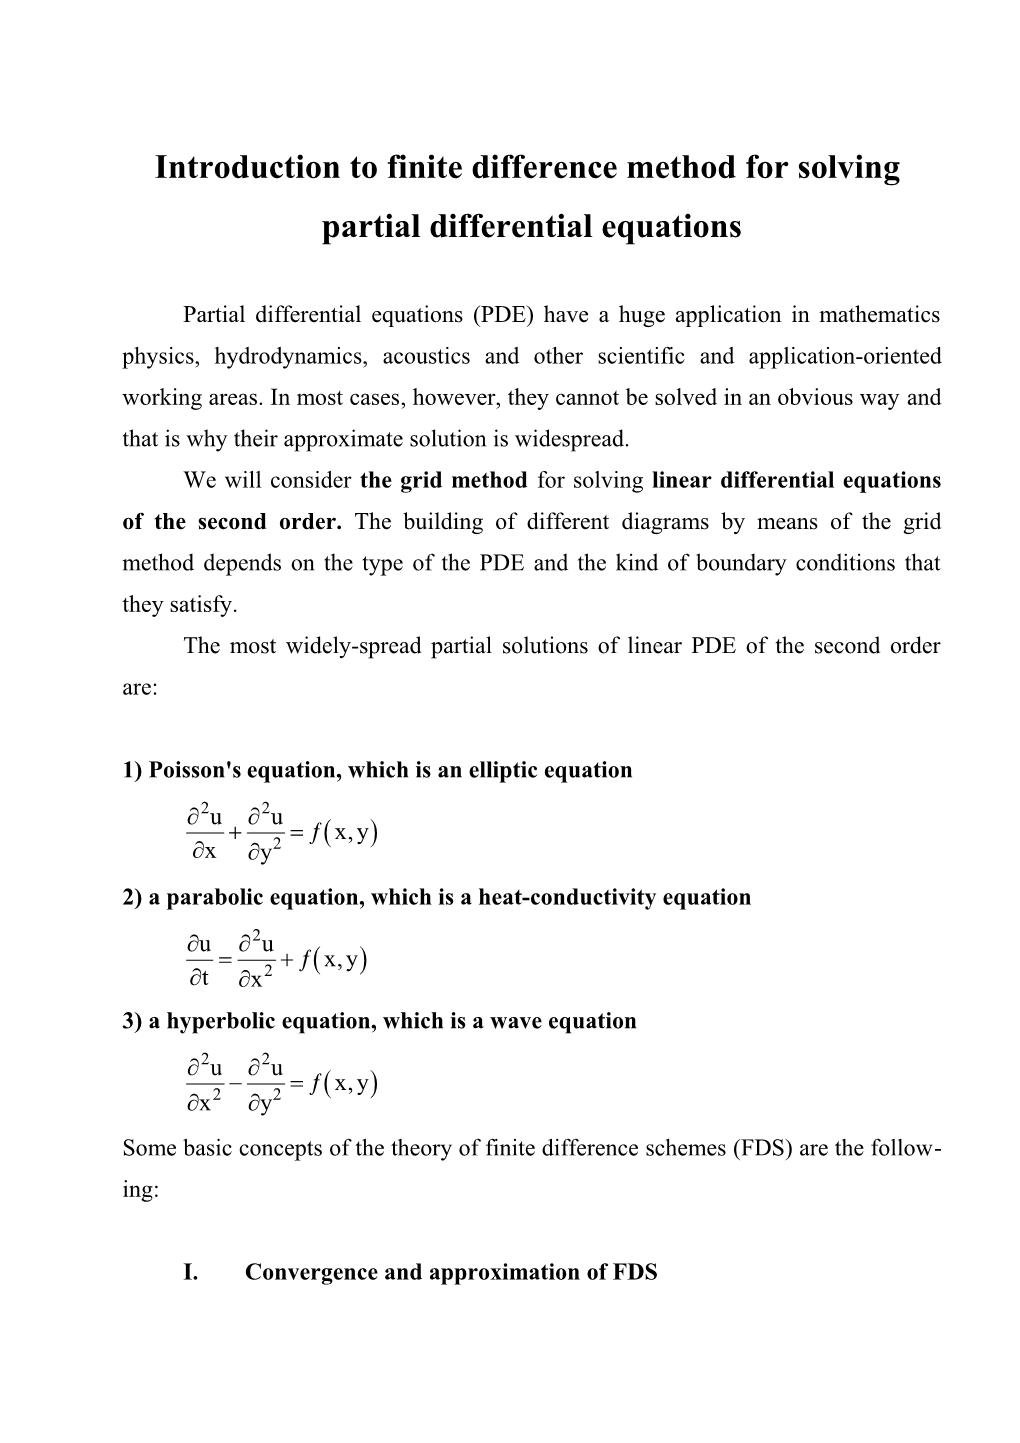 Introduction to Finite Difference Method for Solving